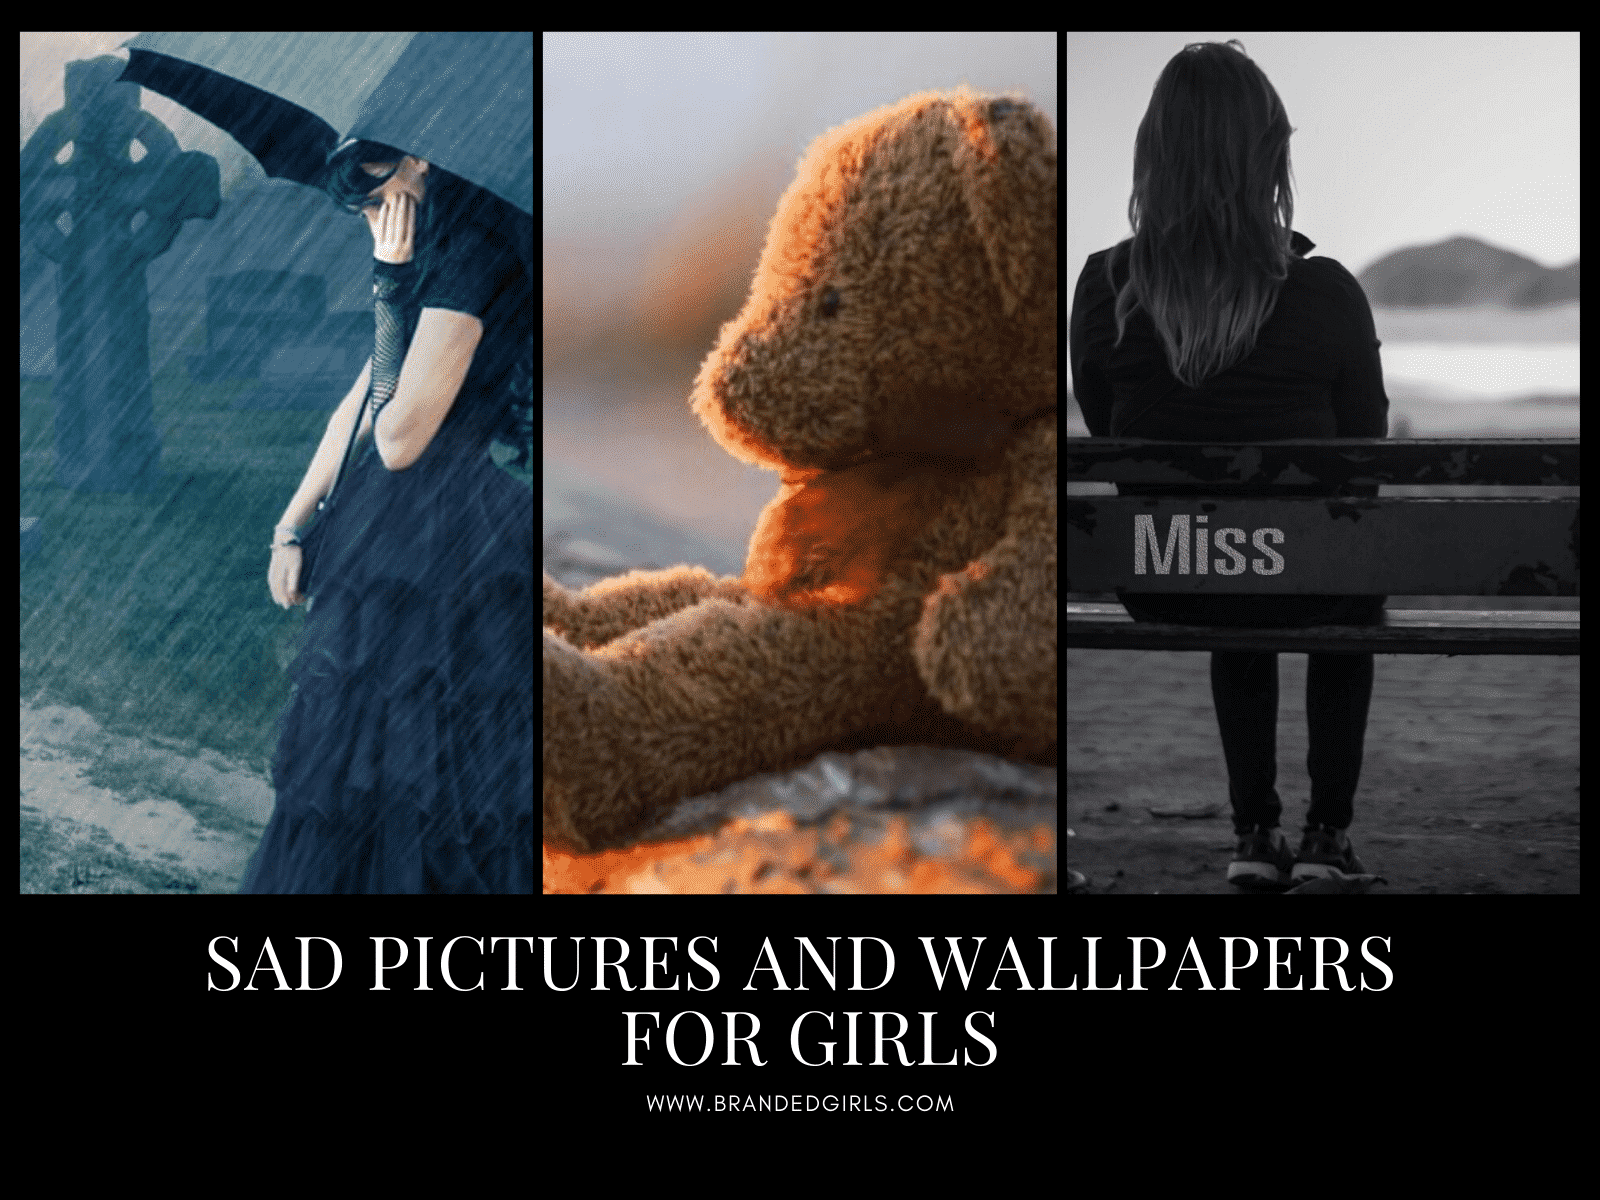 20 Sad Pictures and Wallpapers of Sadness for Girls